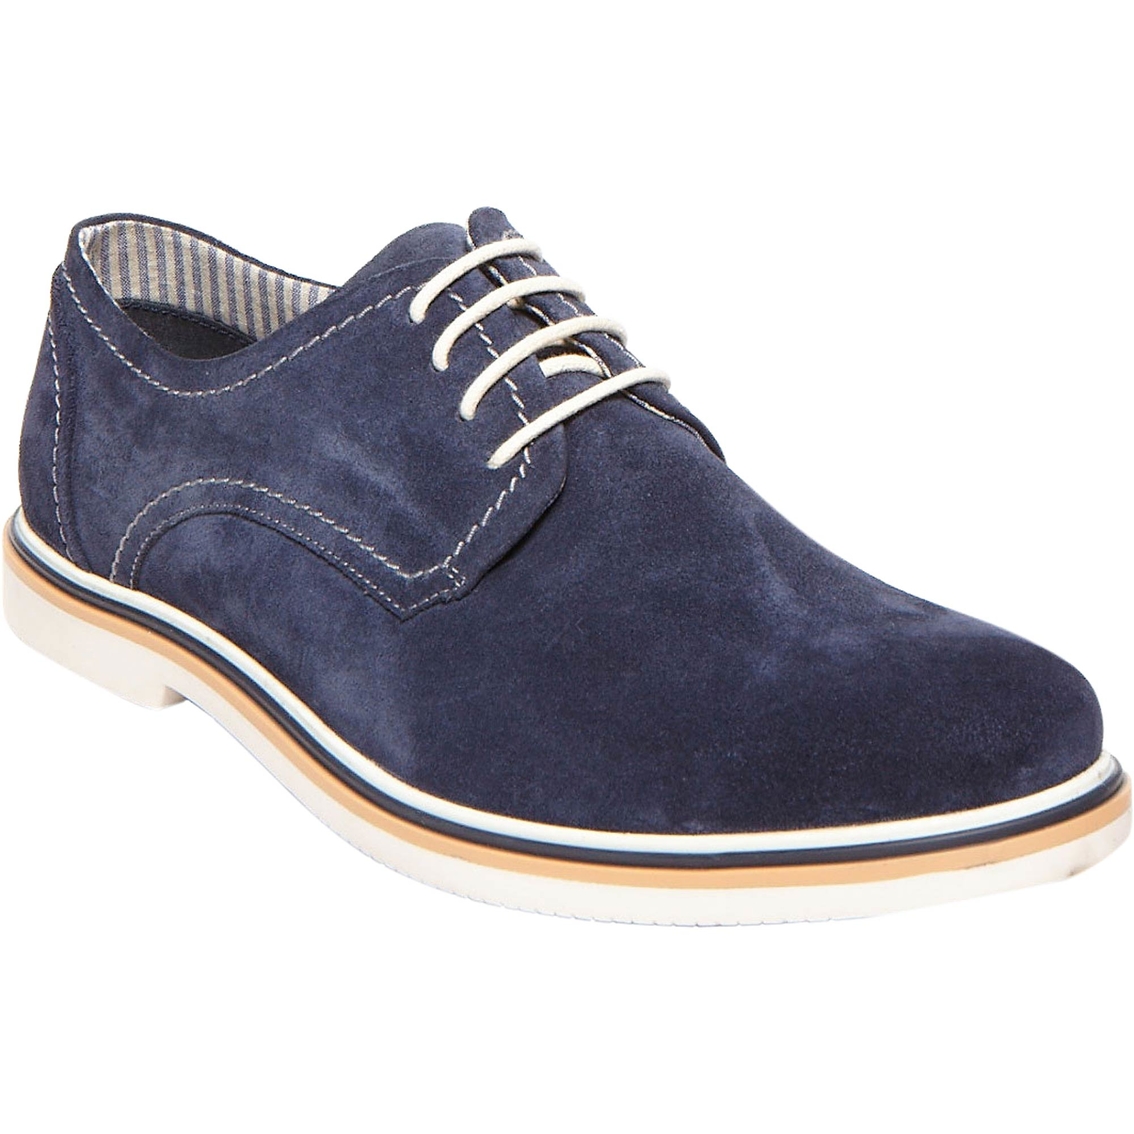 Steve Madden Frick Suede Oxford Shoes | Casuals | Shoes | Shop The Exchange